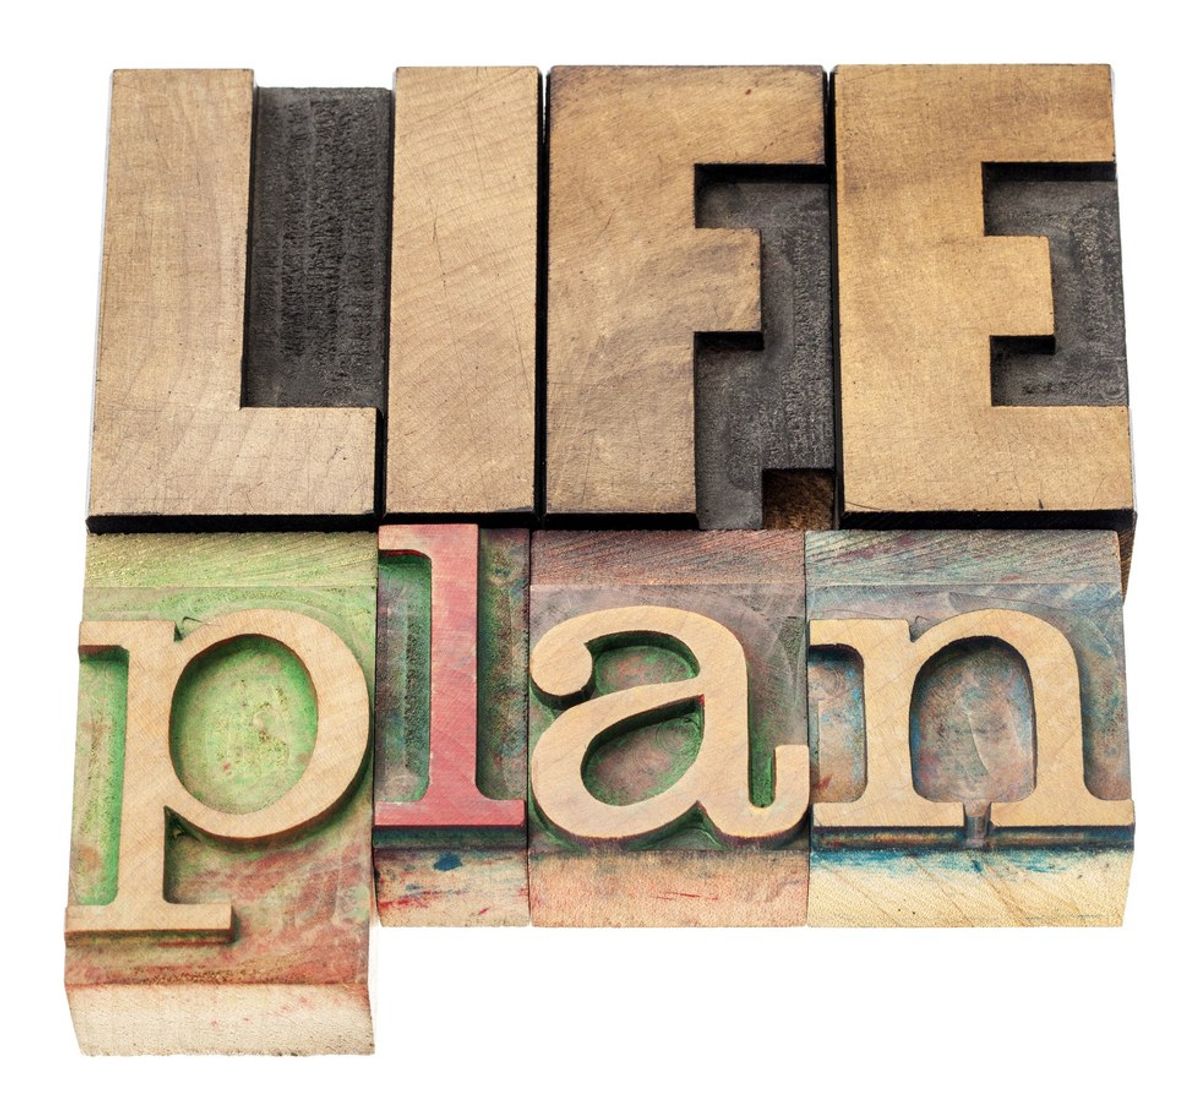 It Ok To Not Have A Life Plan Yet